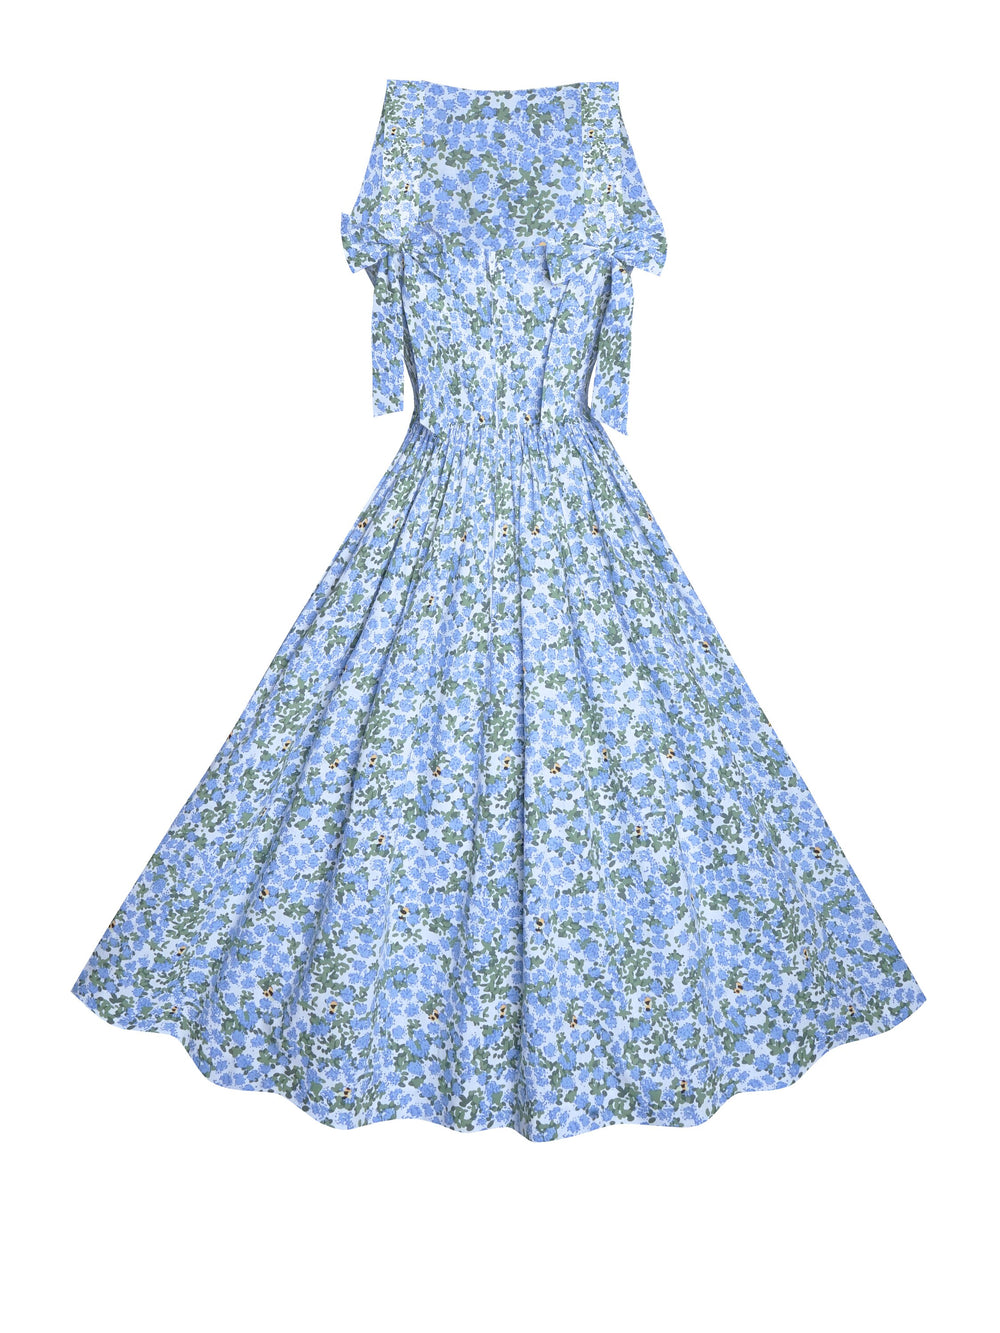 MTO - Madeline Dress "Beeloved Blooms"